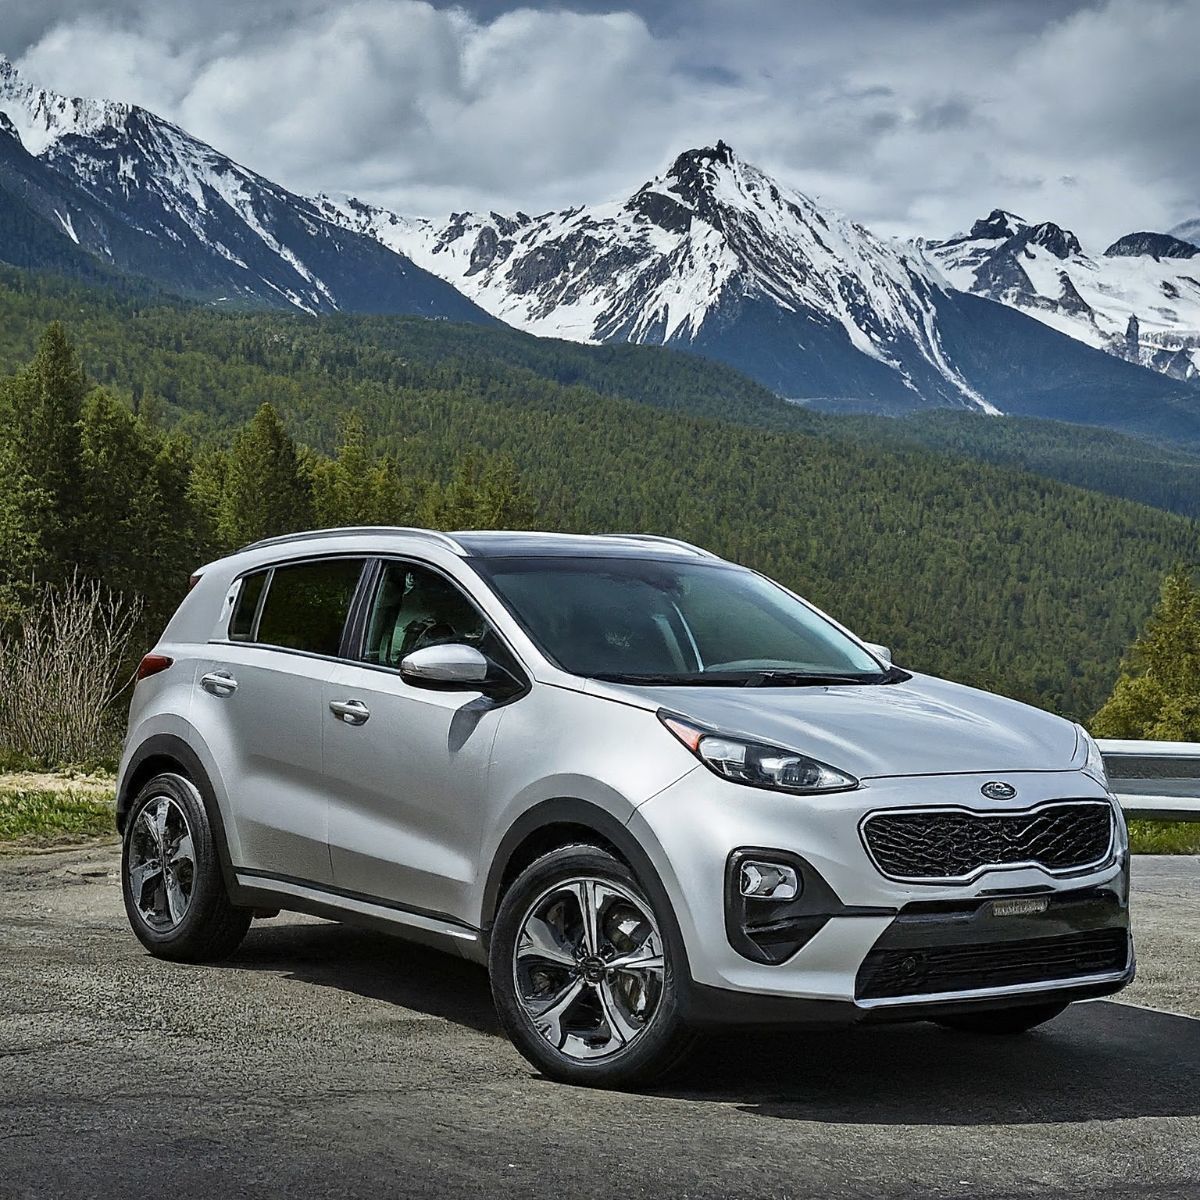 Preowned Kia SUVs: Fuel-Efficient Options for Every Driver